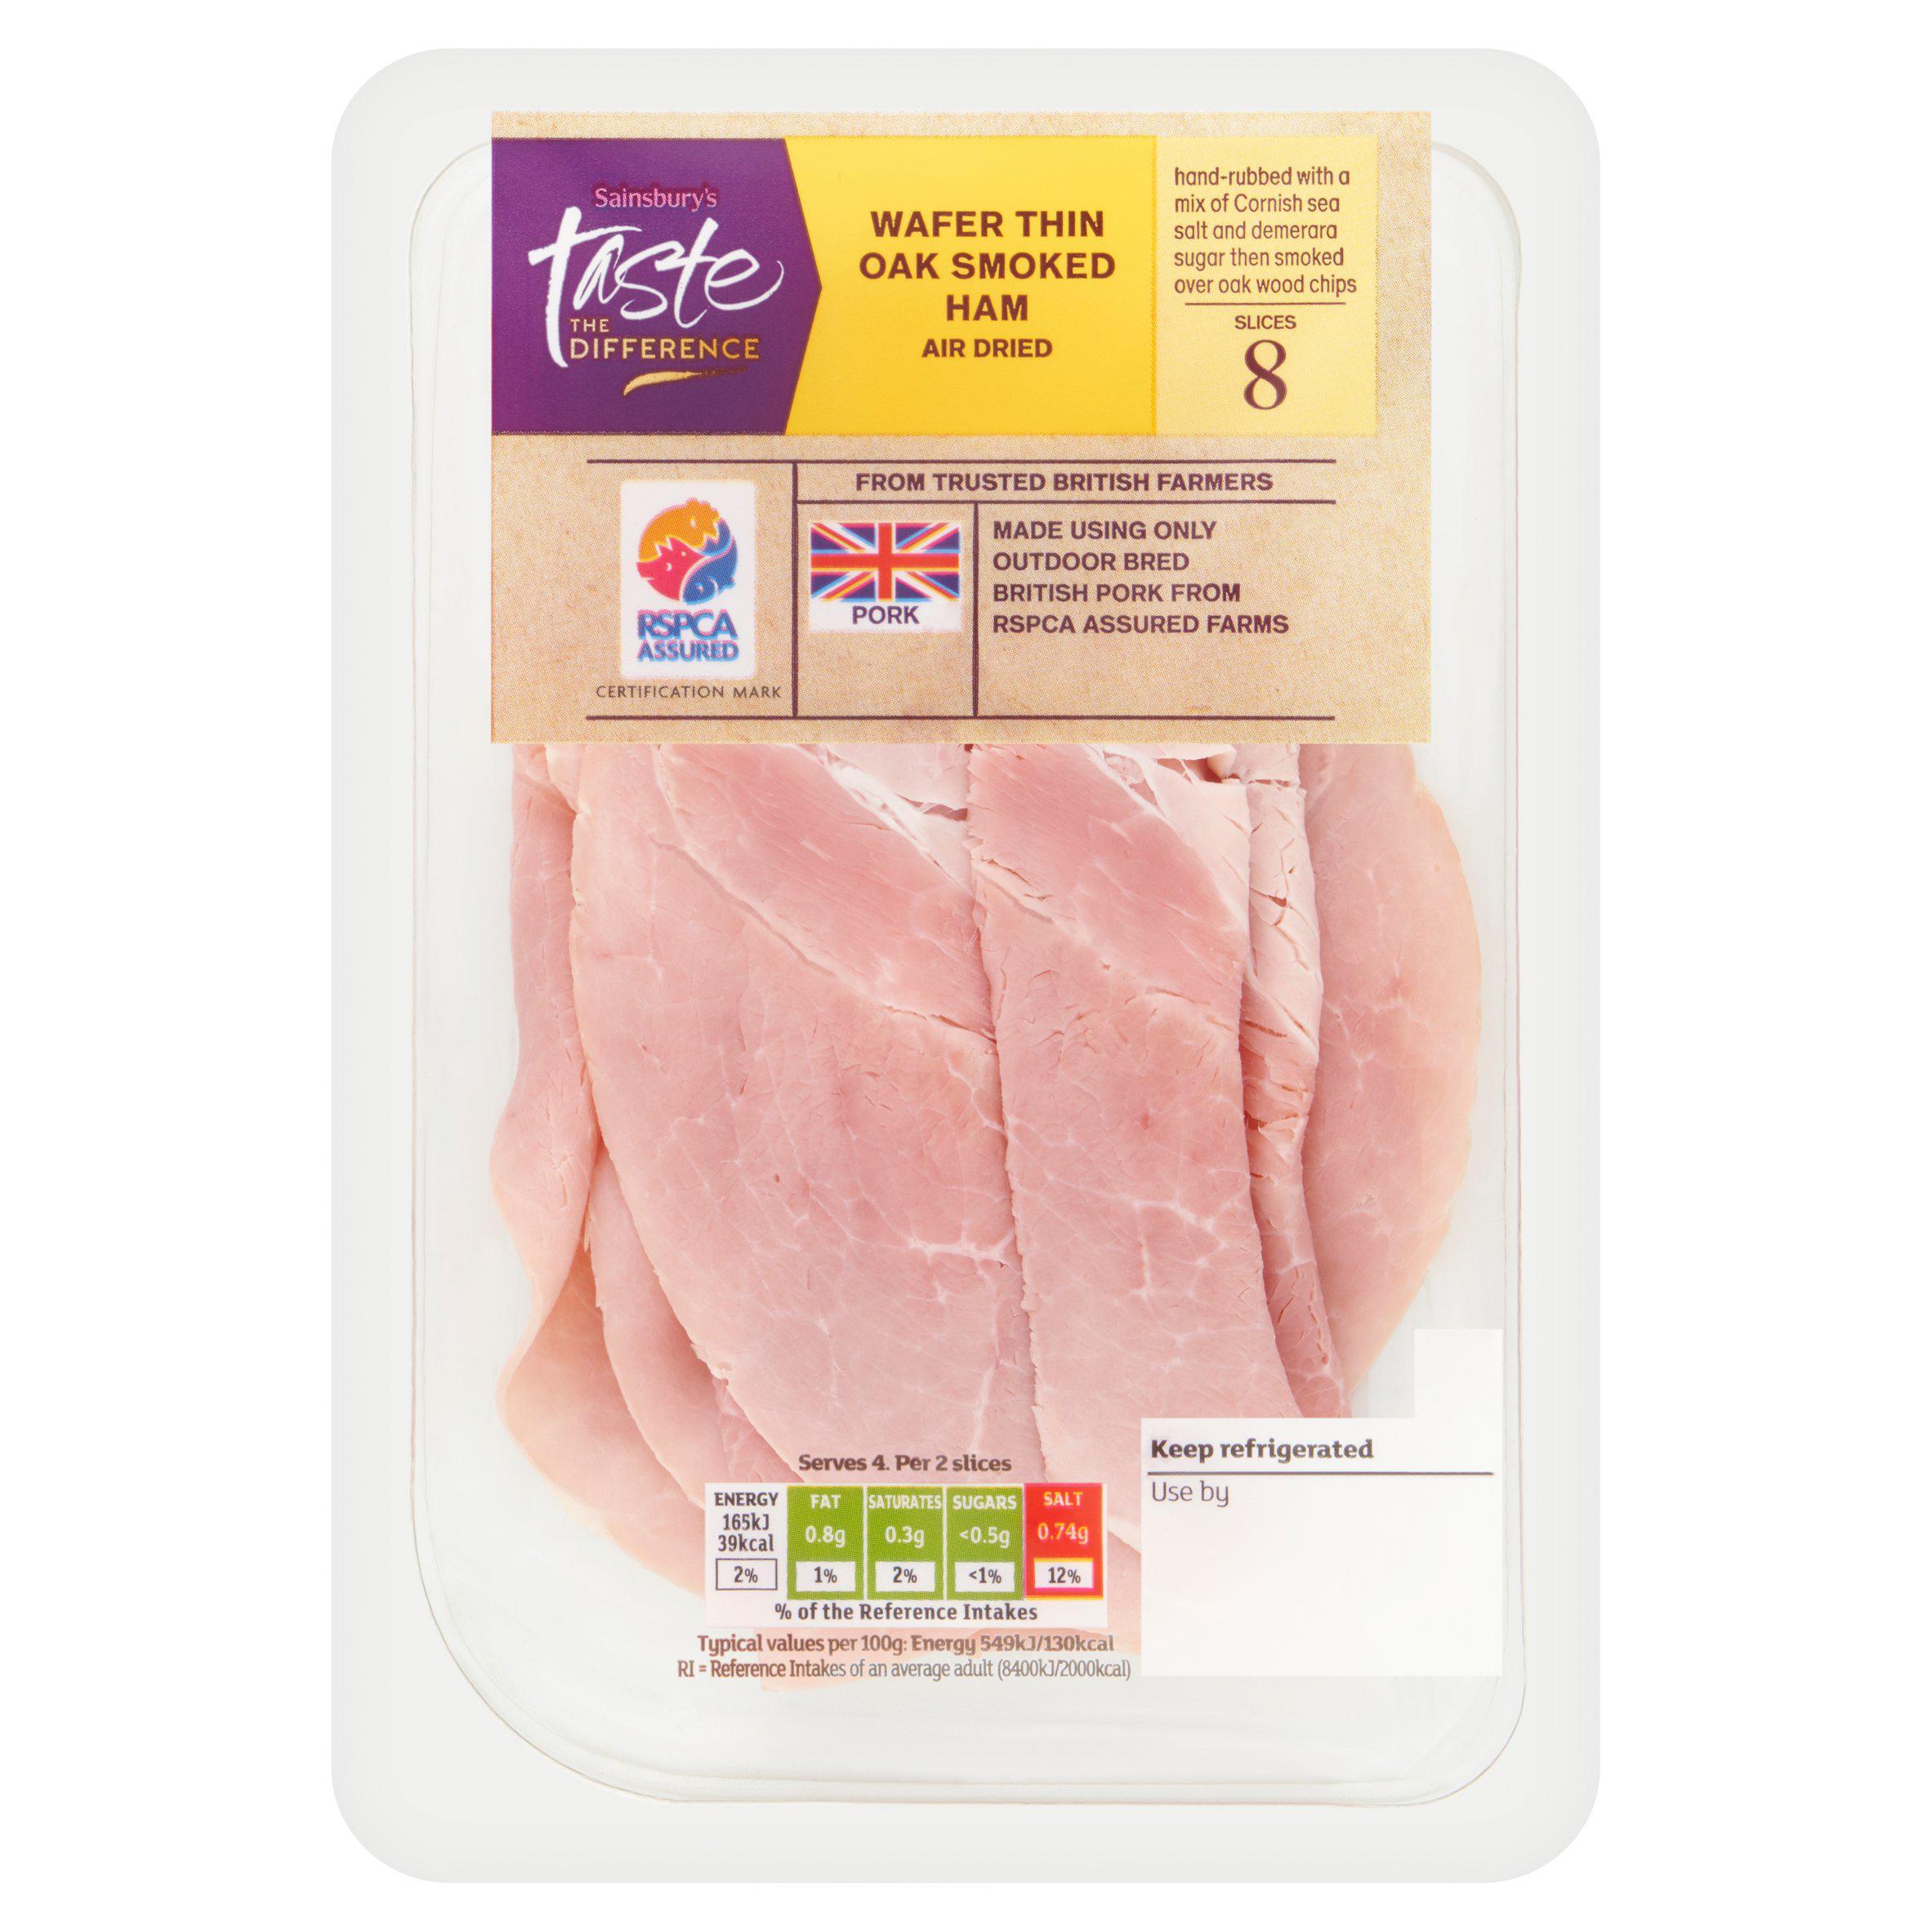 Sainsbury's Air Dried Oak Smoked Wafer Thin Cooked British Ham, Taste the Difference 120g